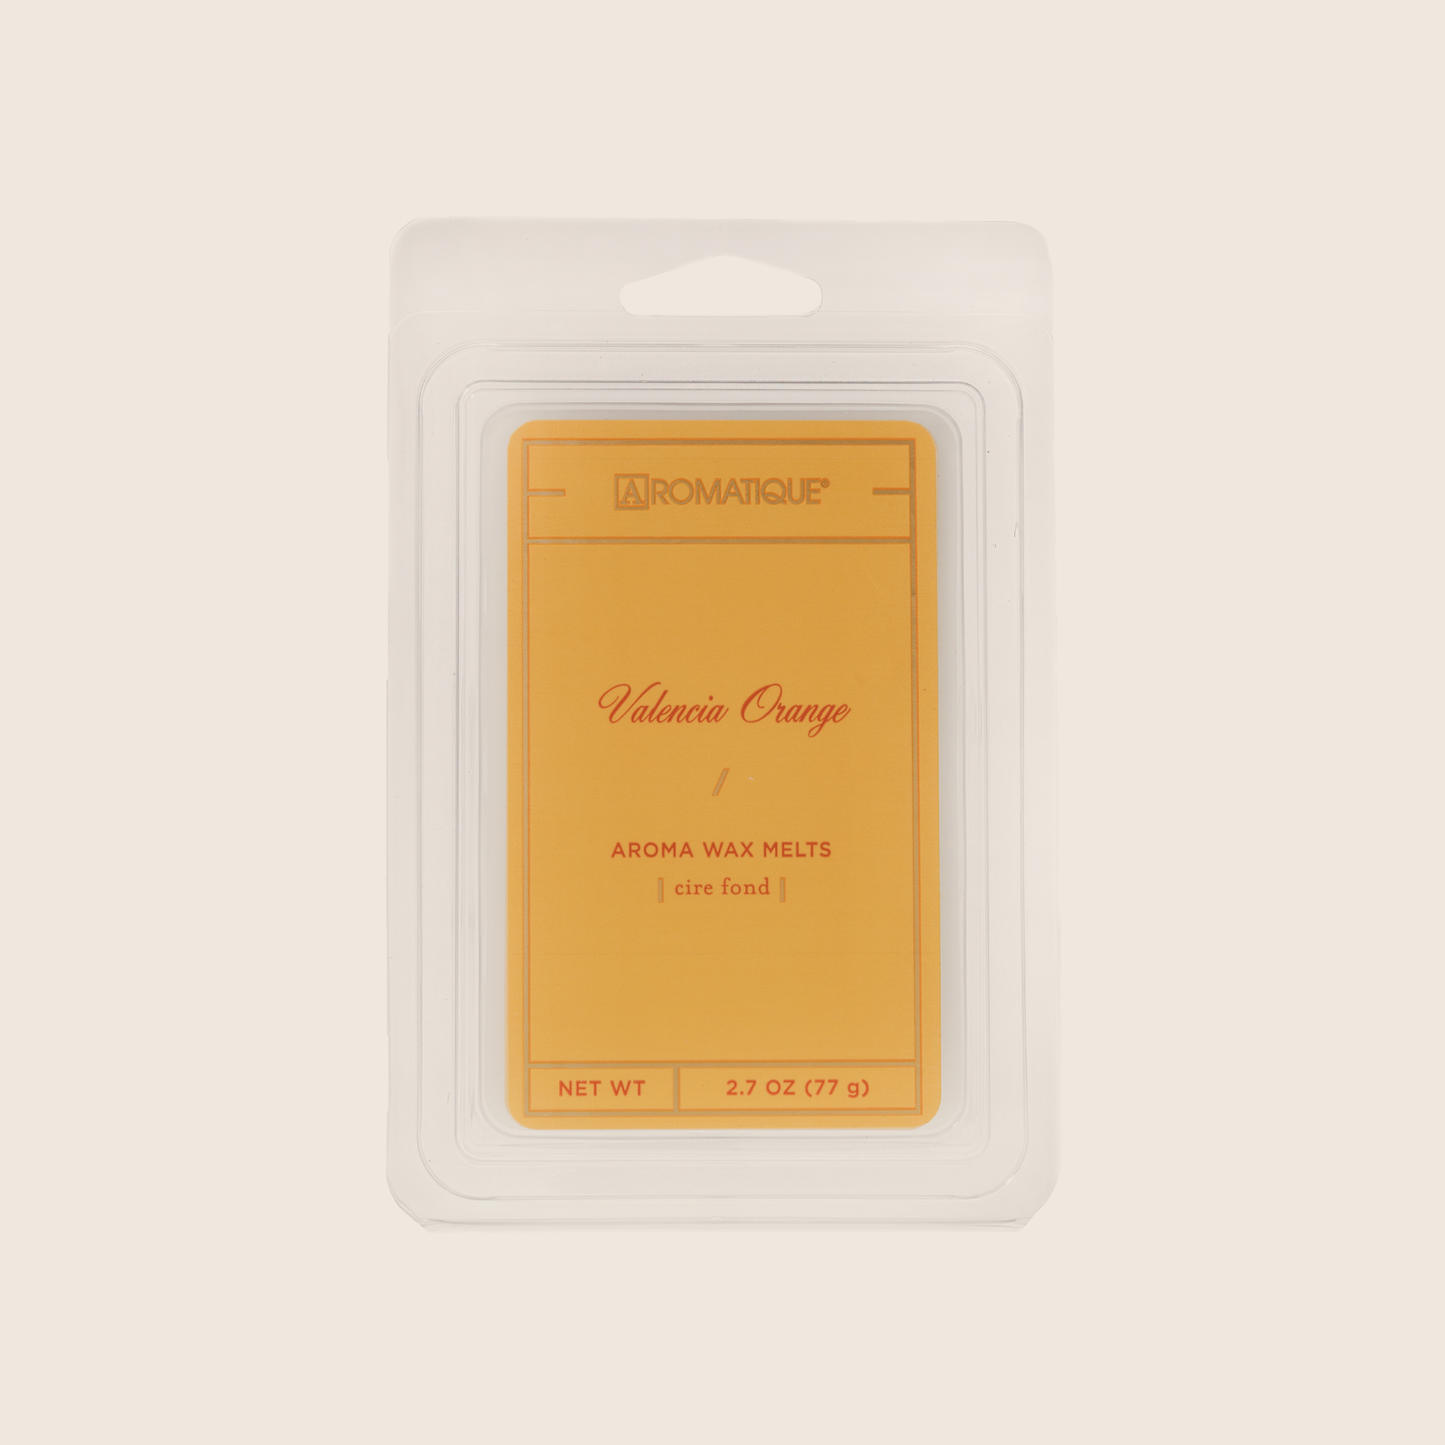 Valencia Orange Aroma Wax Melts transform a room with the fragrance of sweet oranges mixed with notes of apples and red berries with a hint of citrus peel. Aromatique Wax Melts are a set of 8 cubes that contain 100% food-grade paraffin wax and a highly fragrant aroma - no wicks or flames needed. 